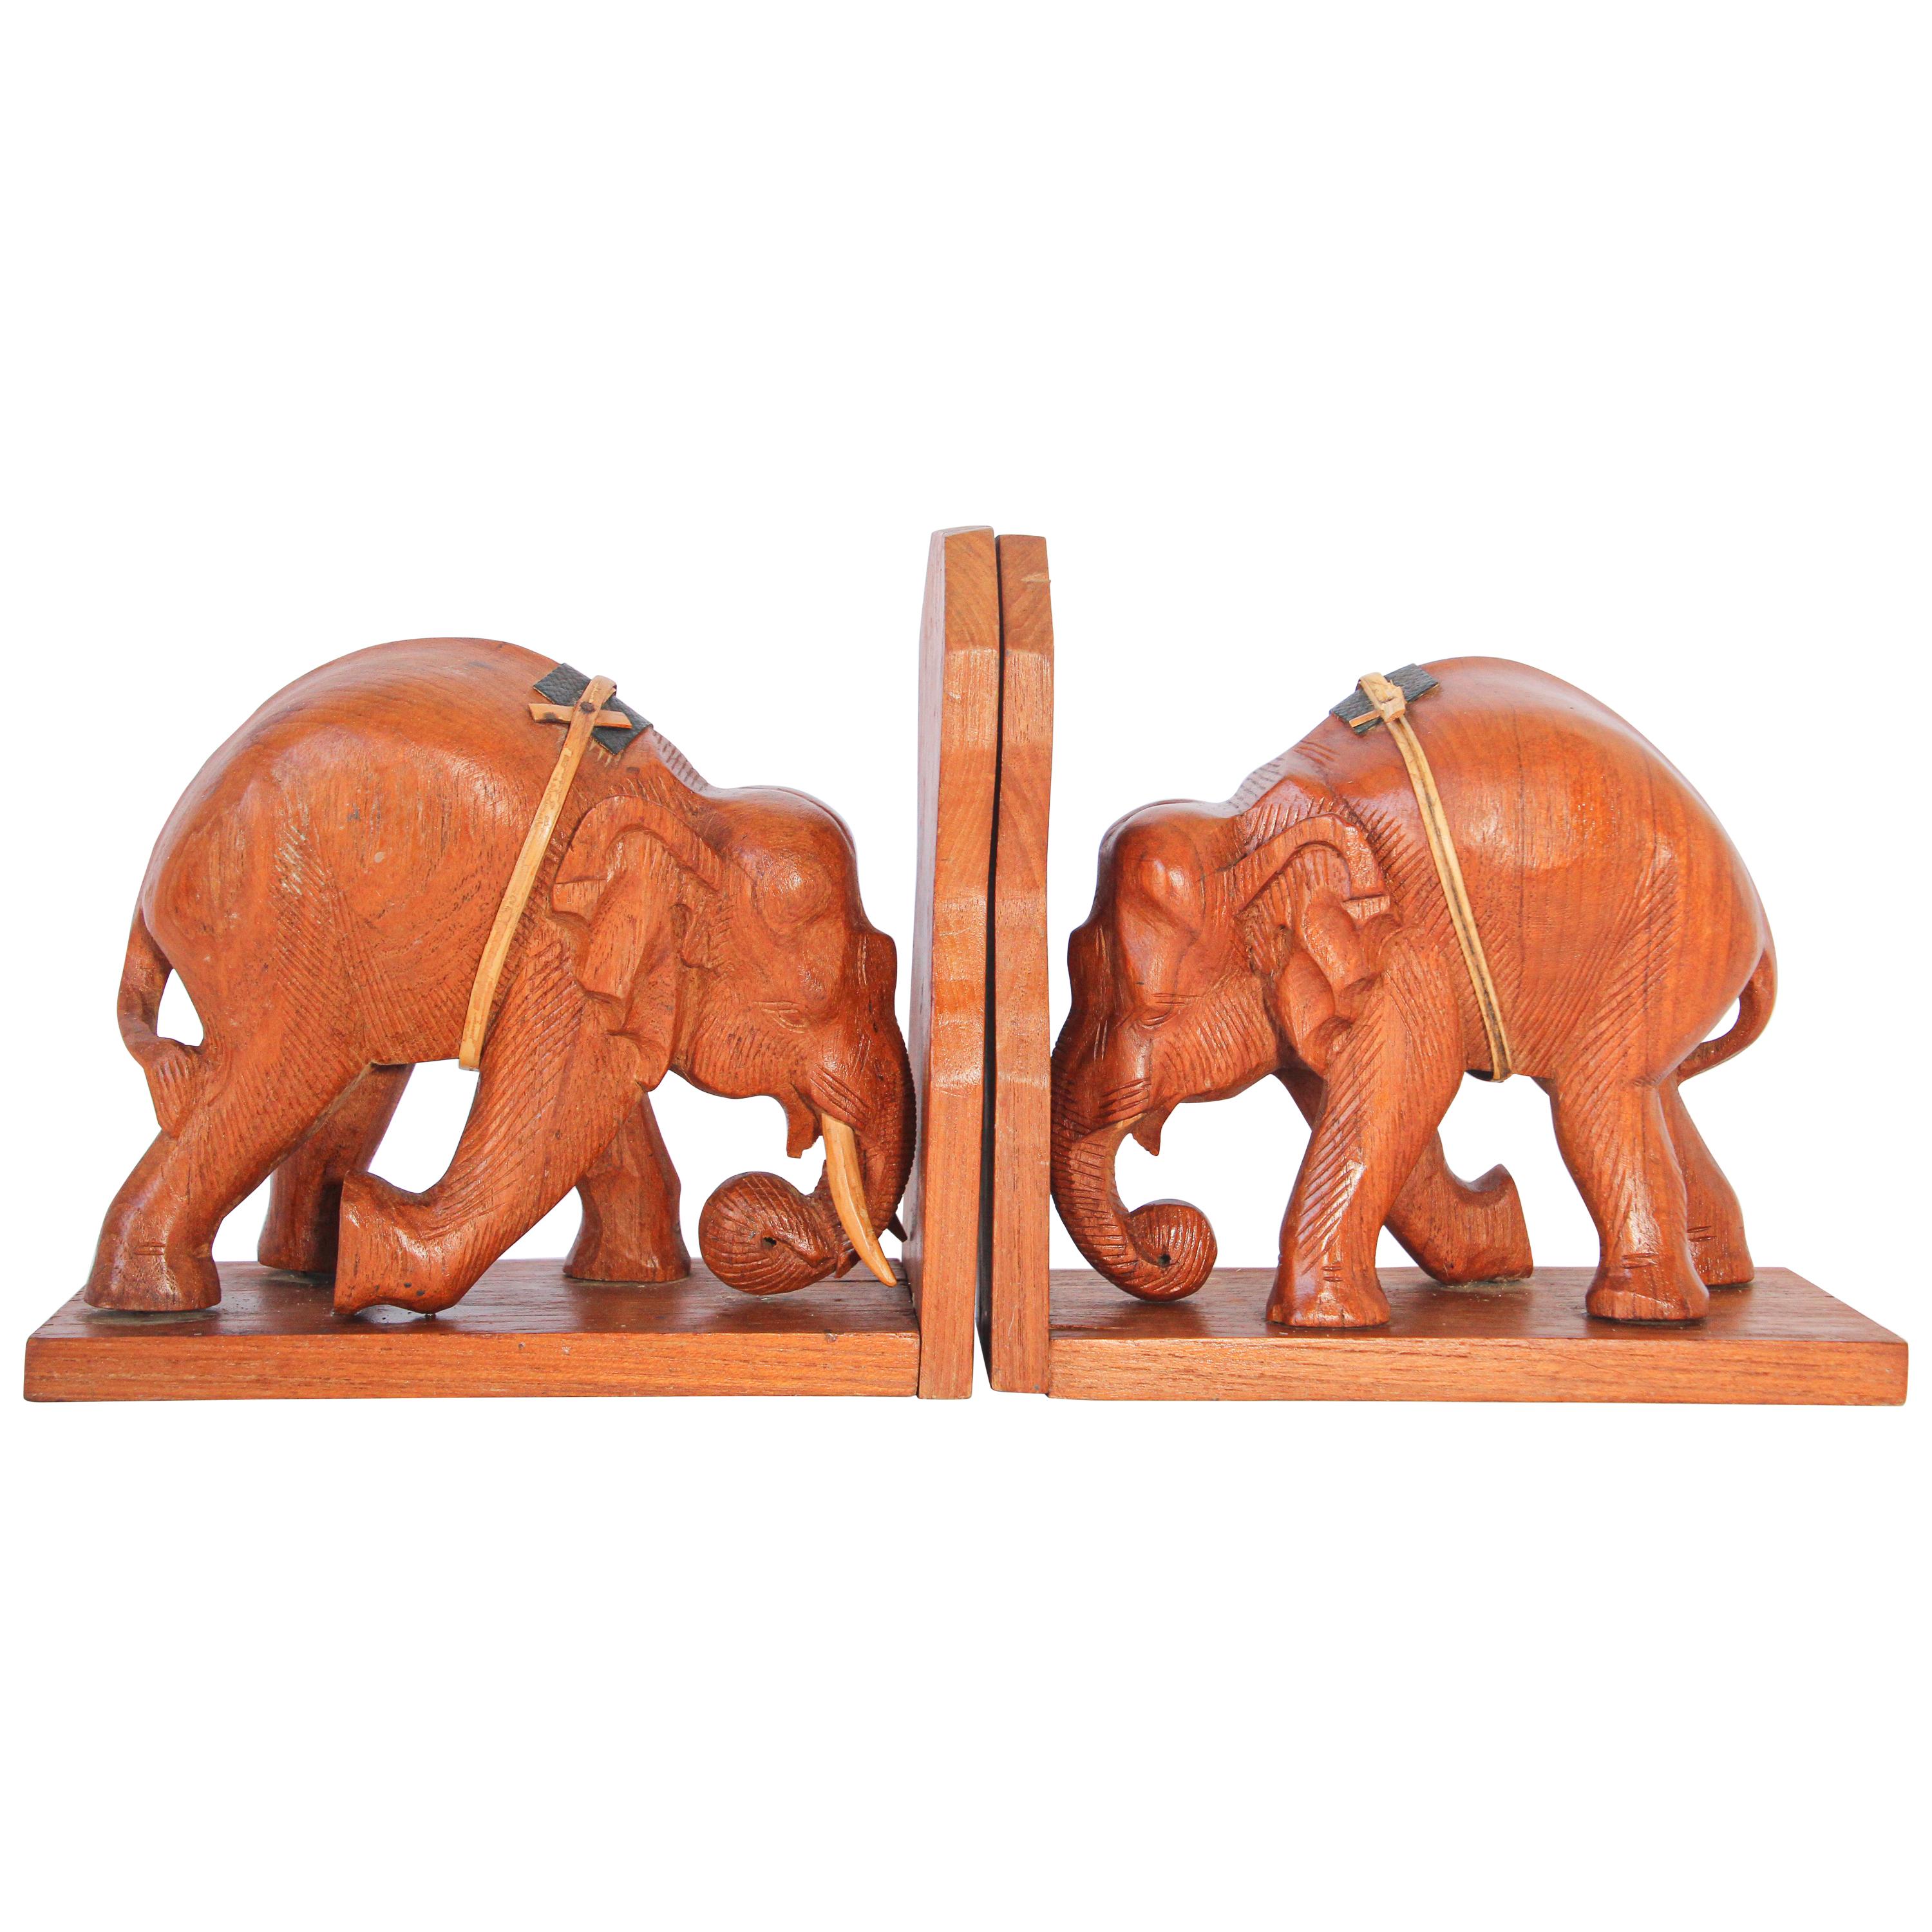 Hand Carved Wooden Elephant Bookends, circa 1950